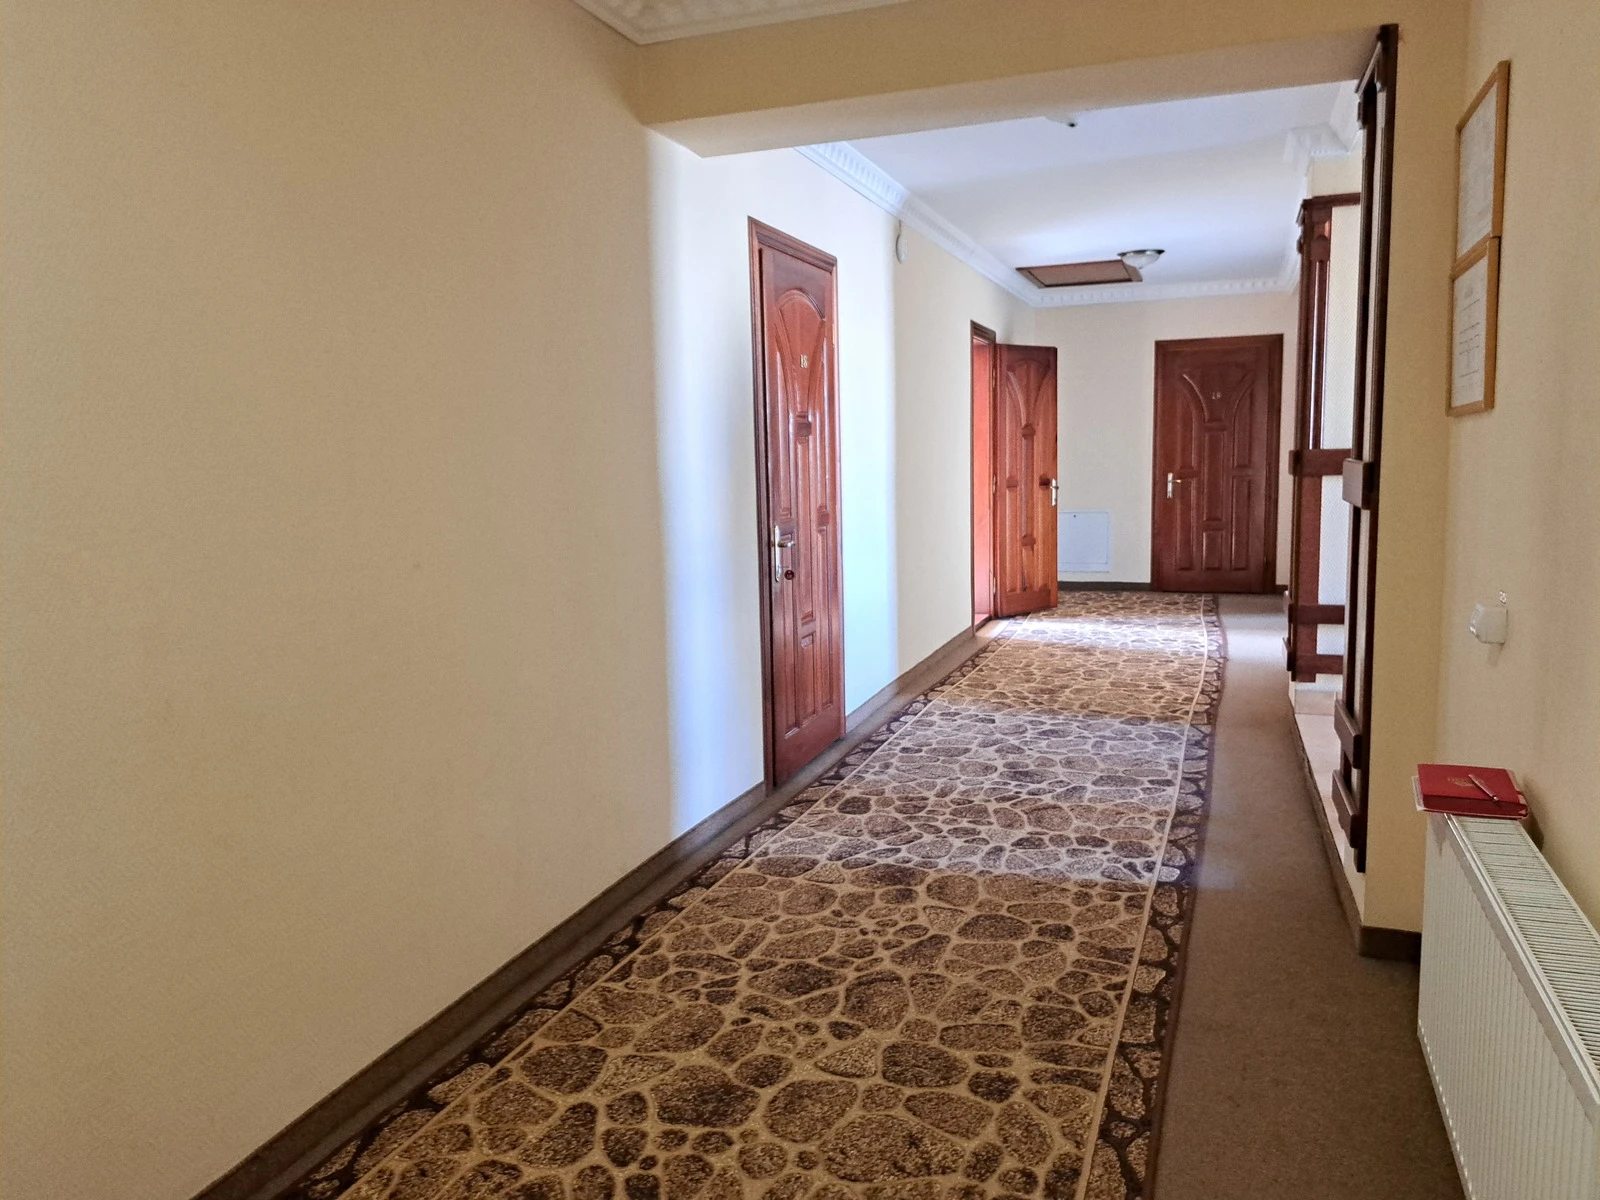 Real estate for sale for commercial purposes. 224 m², 4th floor/4 floors. 10, Budnoho S. vul., Ternopil. 